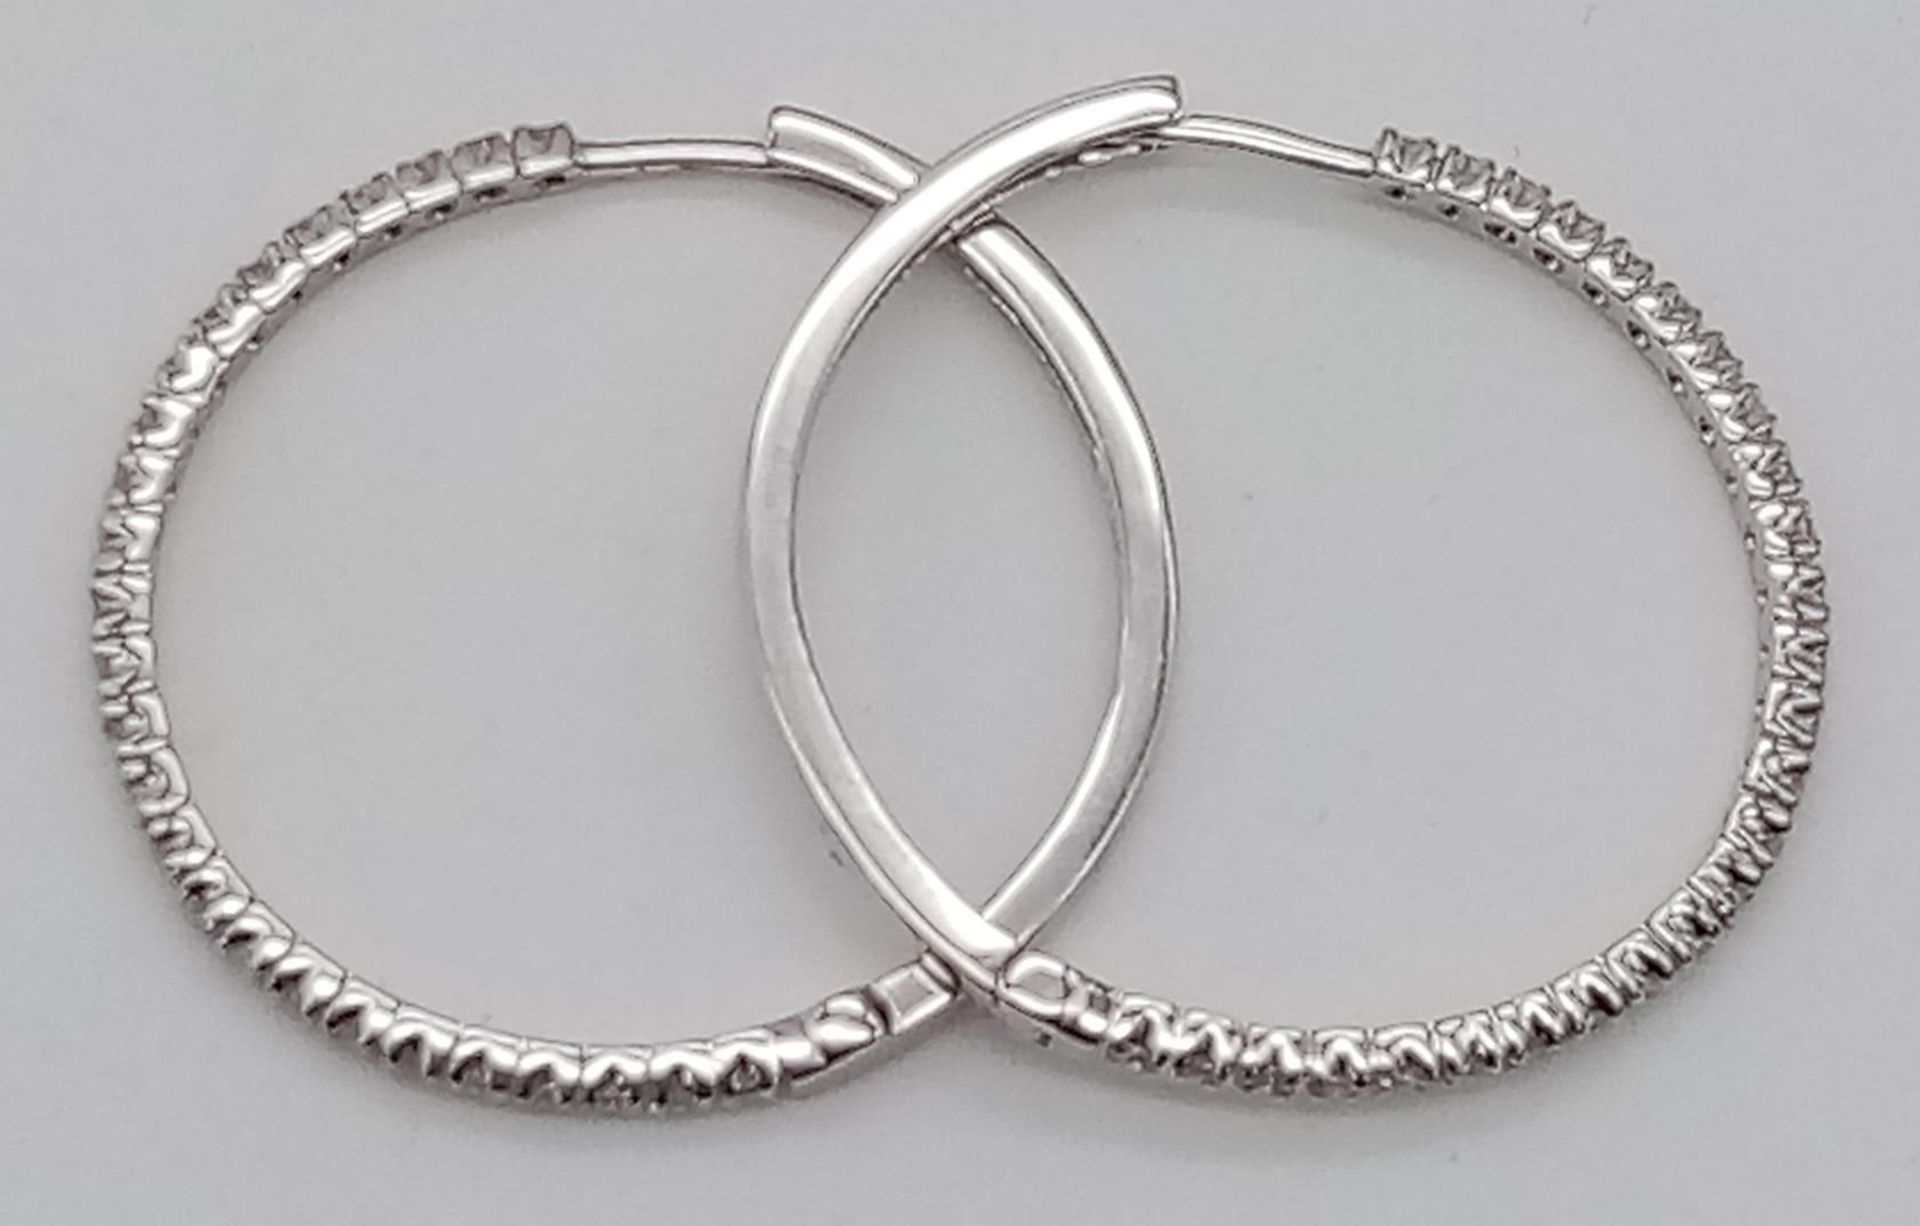 A PAIR OF 9K WHITE GOLD DIAMOND SET HOOP EARRINGS, APPROX 0.30CT DIAMONDS, WEIGHT 3.6G